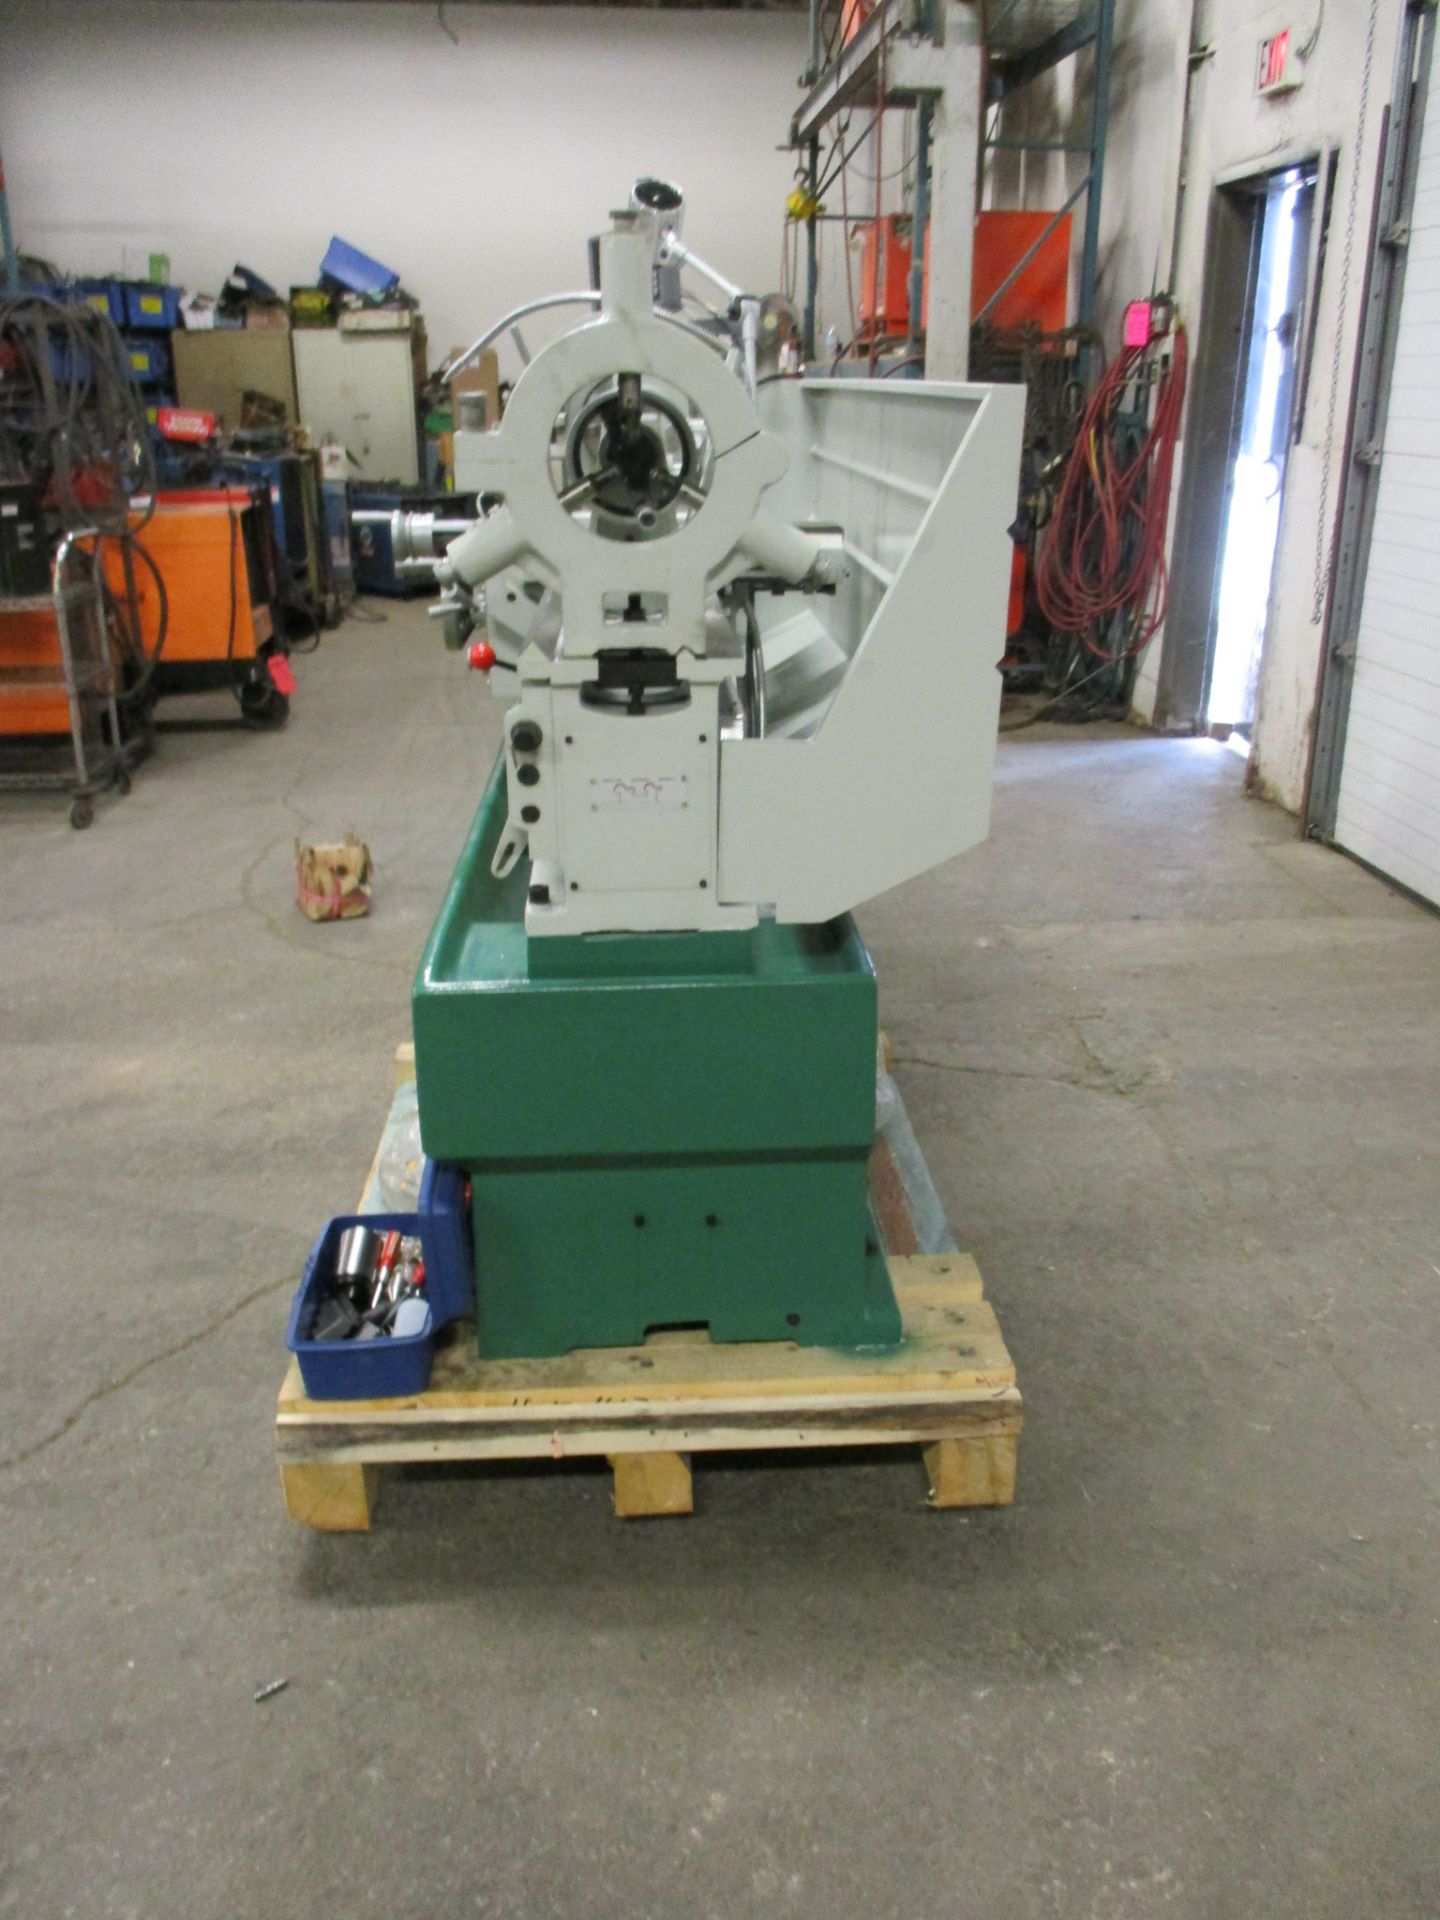 Bernardo Macchina Engine Lathe model BL1660 - 16" Swing with 60" Between Centres - complete with DRO - Image 4 of 5